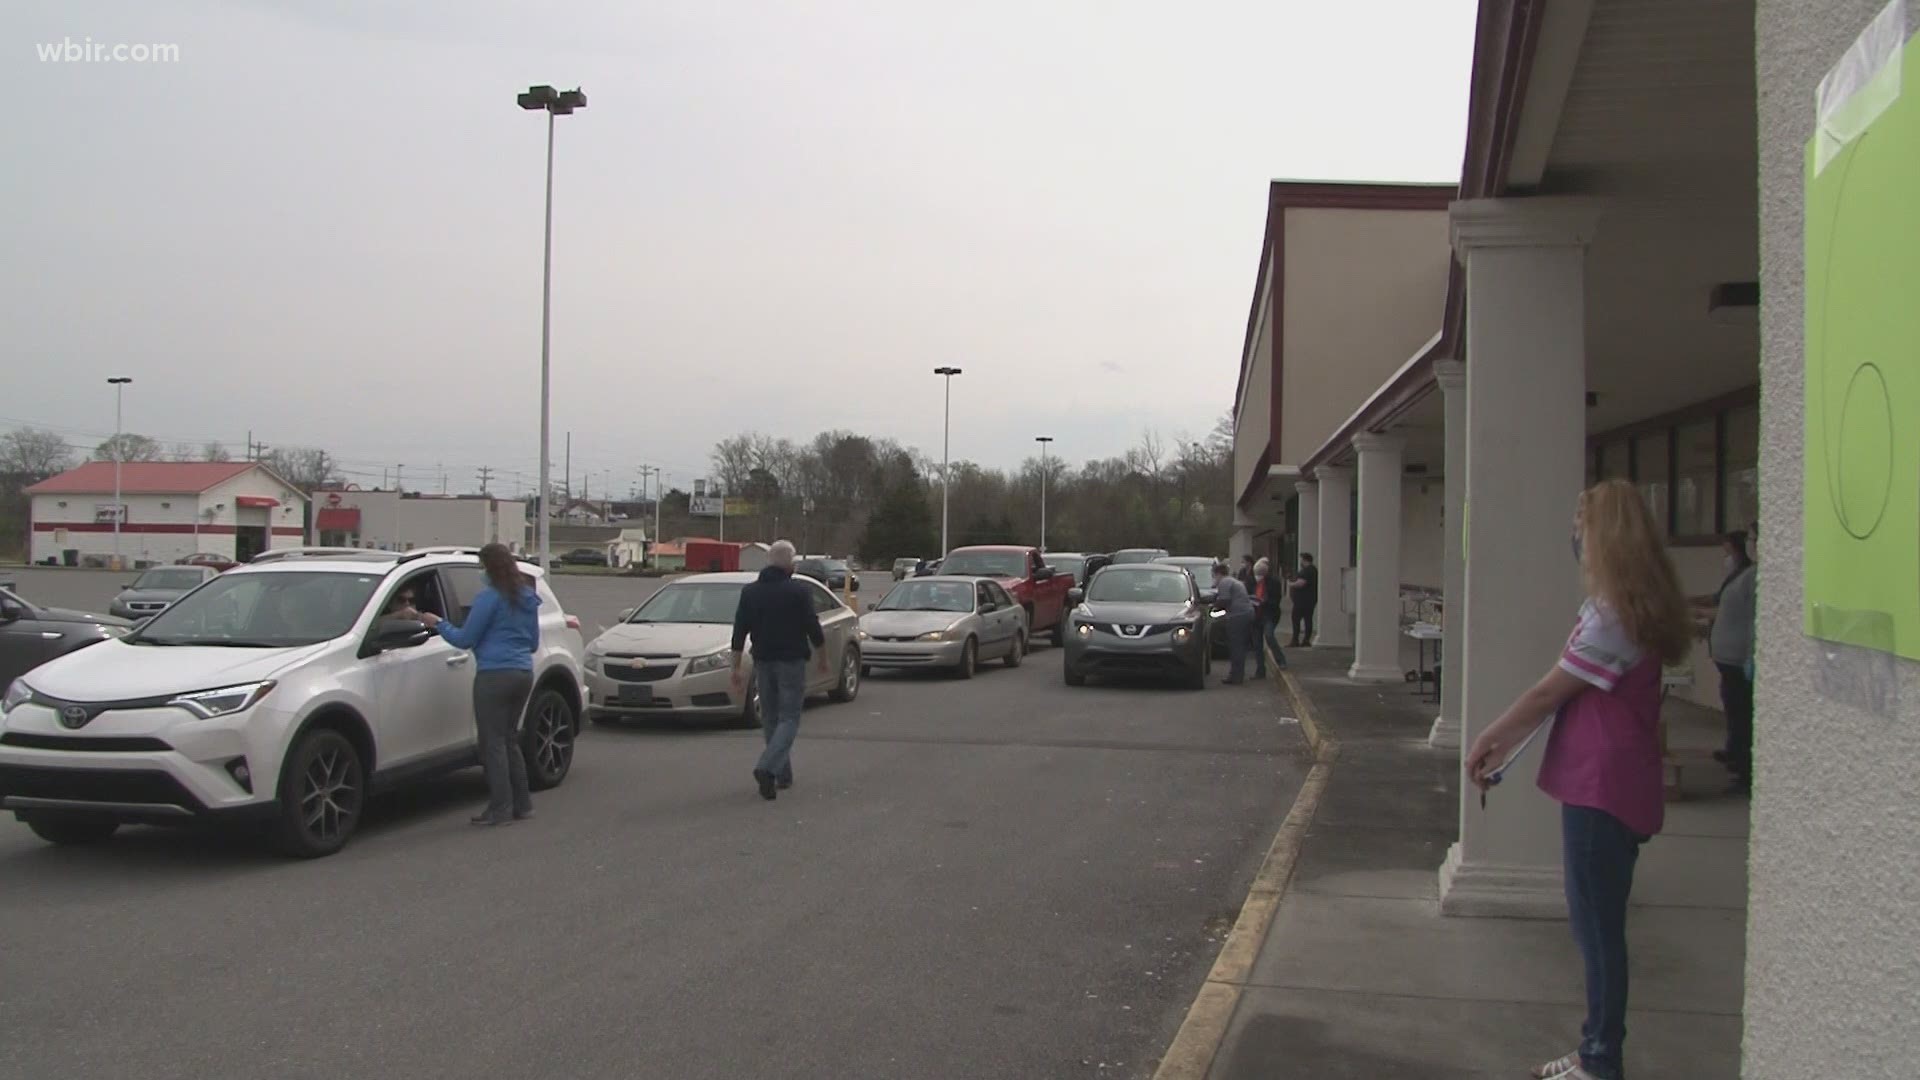 A Newport pharmacy vaccinated more than 600 people at a drive-through clinic on Saturday.